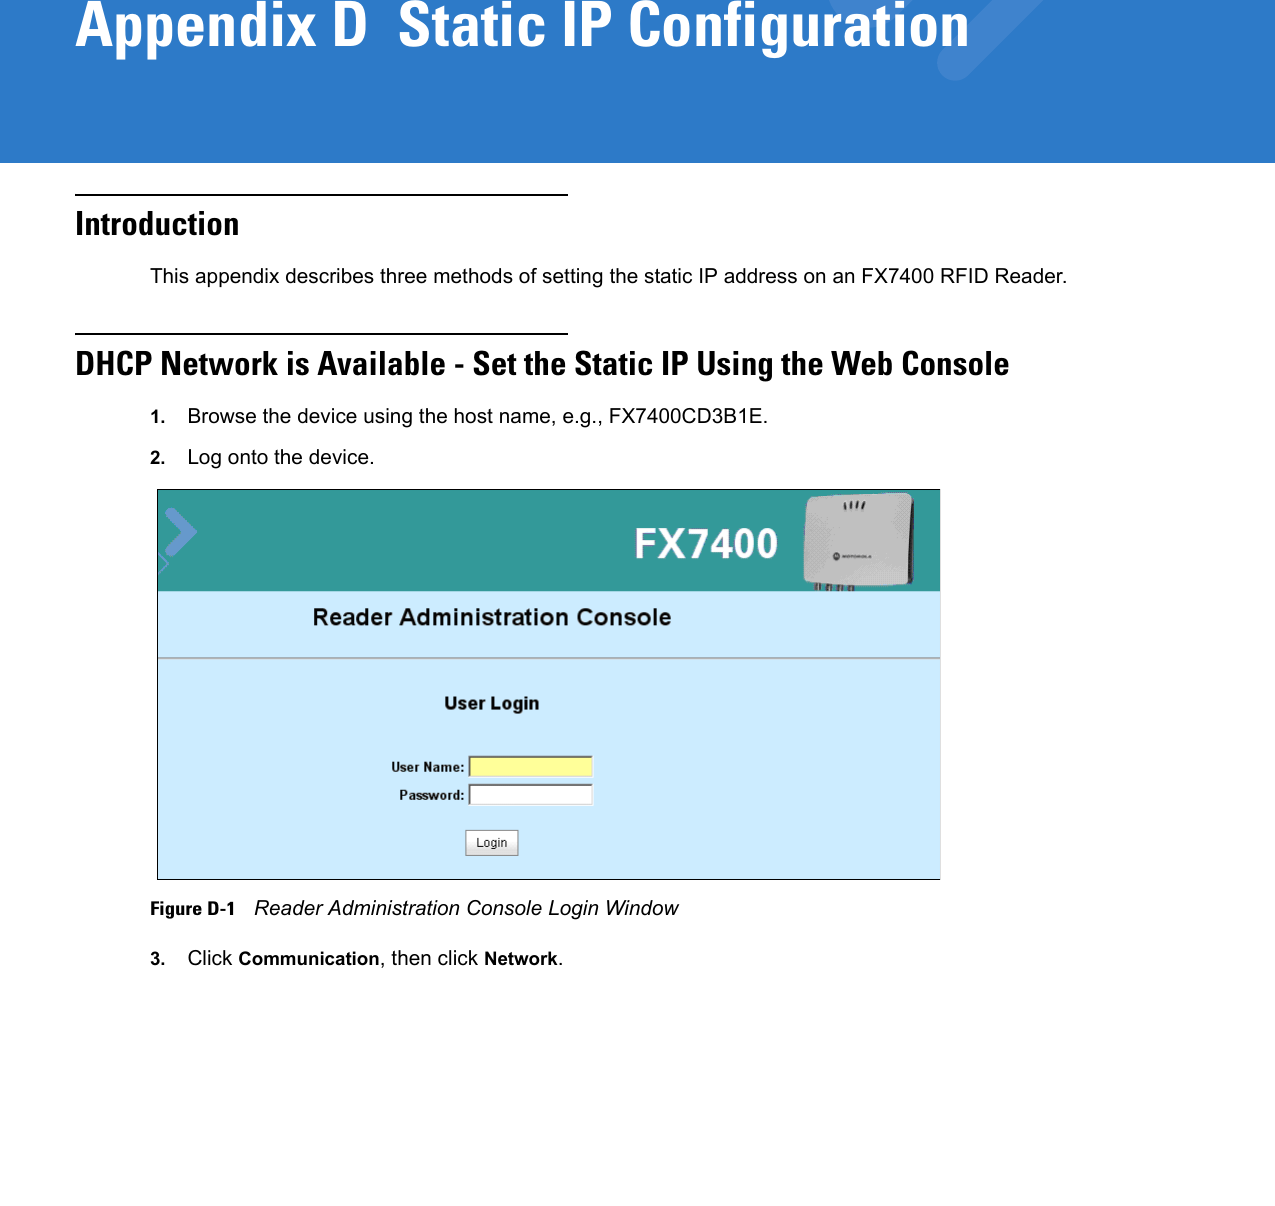 Appendix D  Static IP ConfigurationIntroductionThis appendix describes three methods of setting the static IP address on an FX7400 RFID Reader.DHCP Network is Available - Set the Static IP Using the Web Console1. Browse the device using the host name, e.g., FX7400CD3B1E.2. Log onto the device. Figure D-1    Reader Administration Console Login Window3. Click Communication, then click Network. 